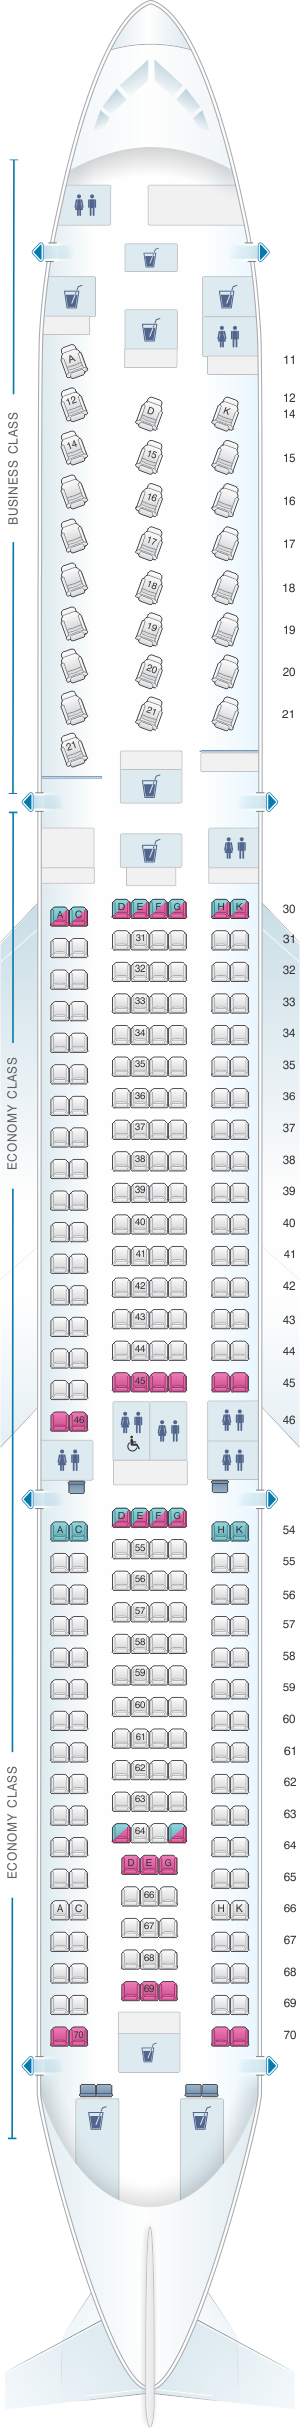 Seat map for Cathay Pacific Airways Airbus A340 300 (34B)